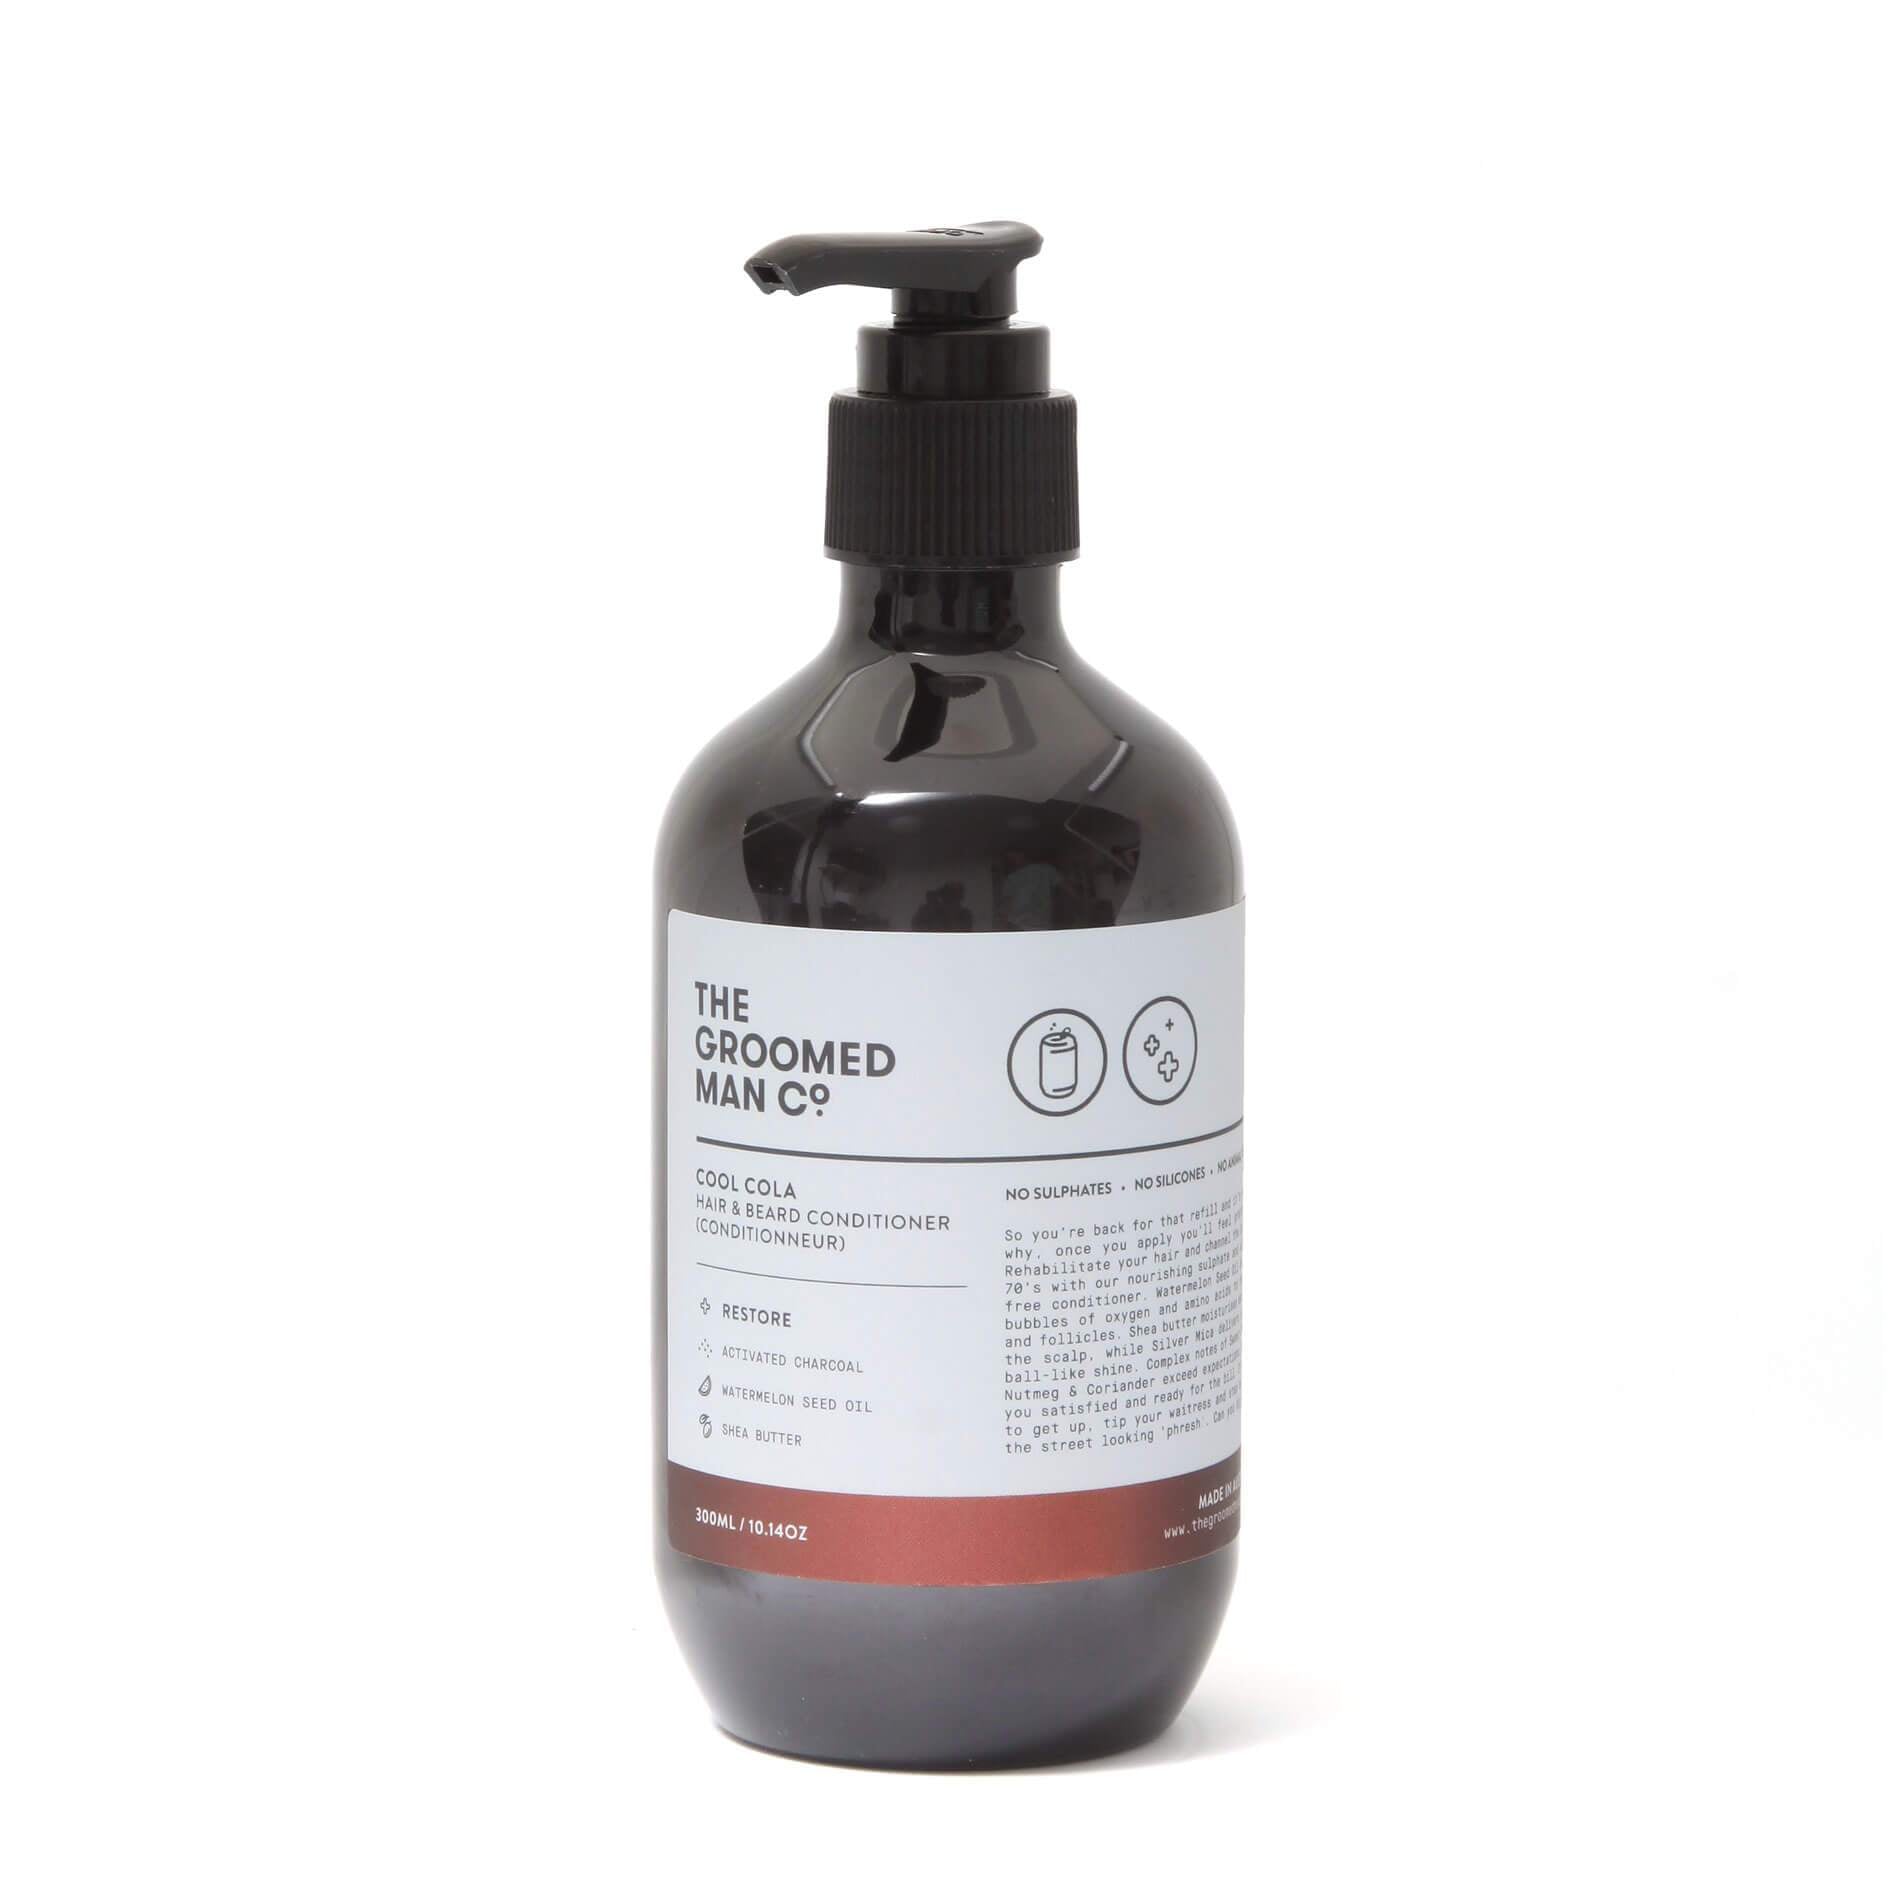 The Groomed Man Co Cool Cola Conditioner